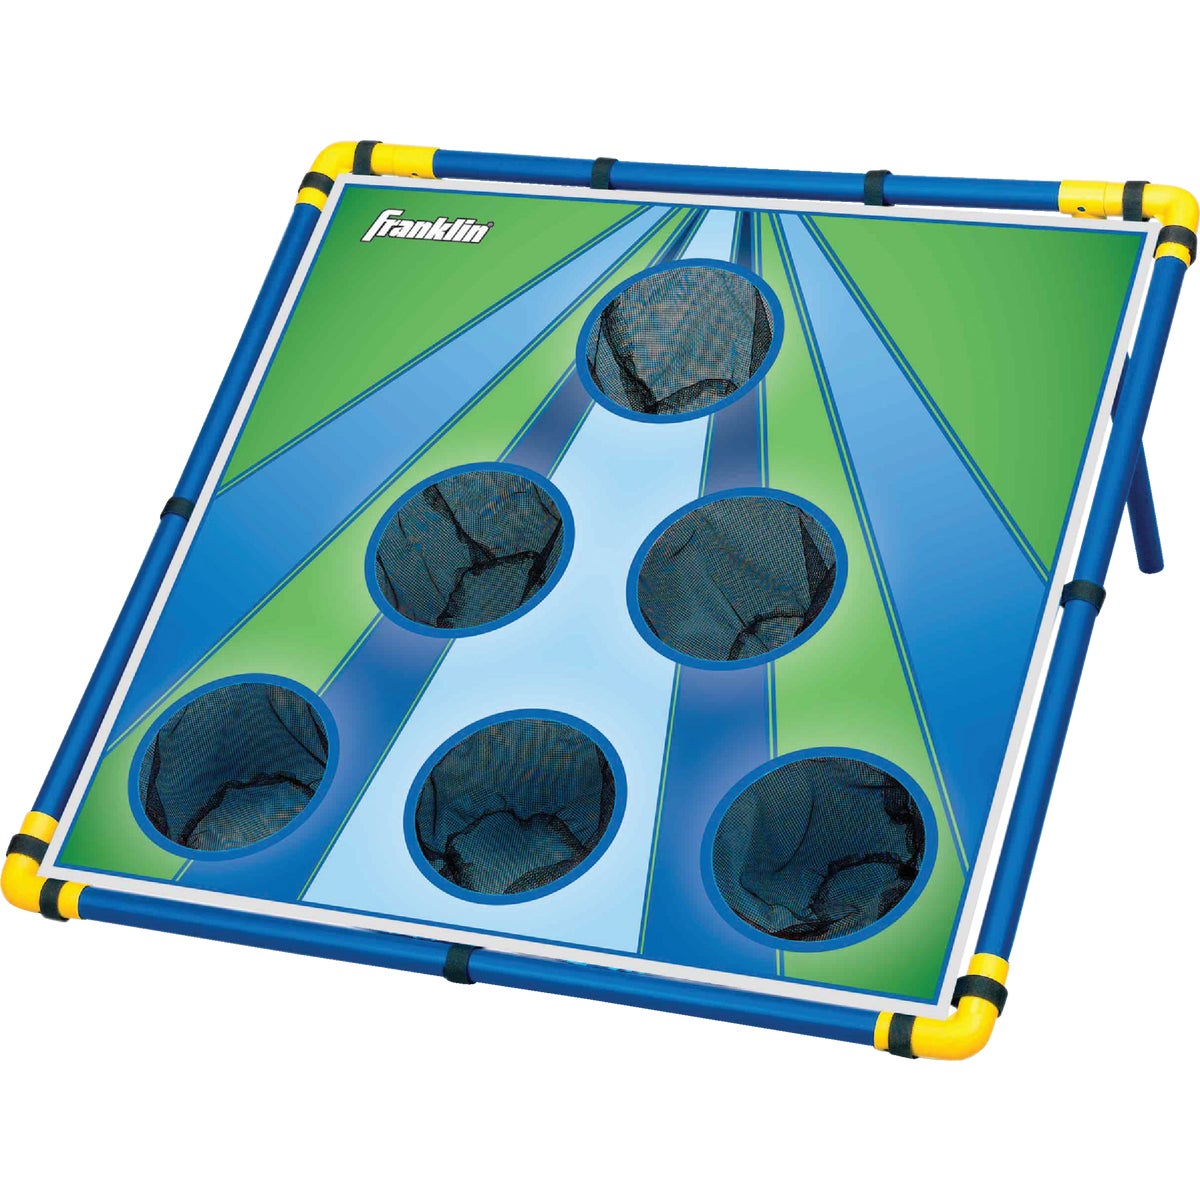 Item 808317, All-weather lawn target with 6 holes.